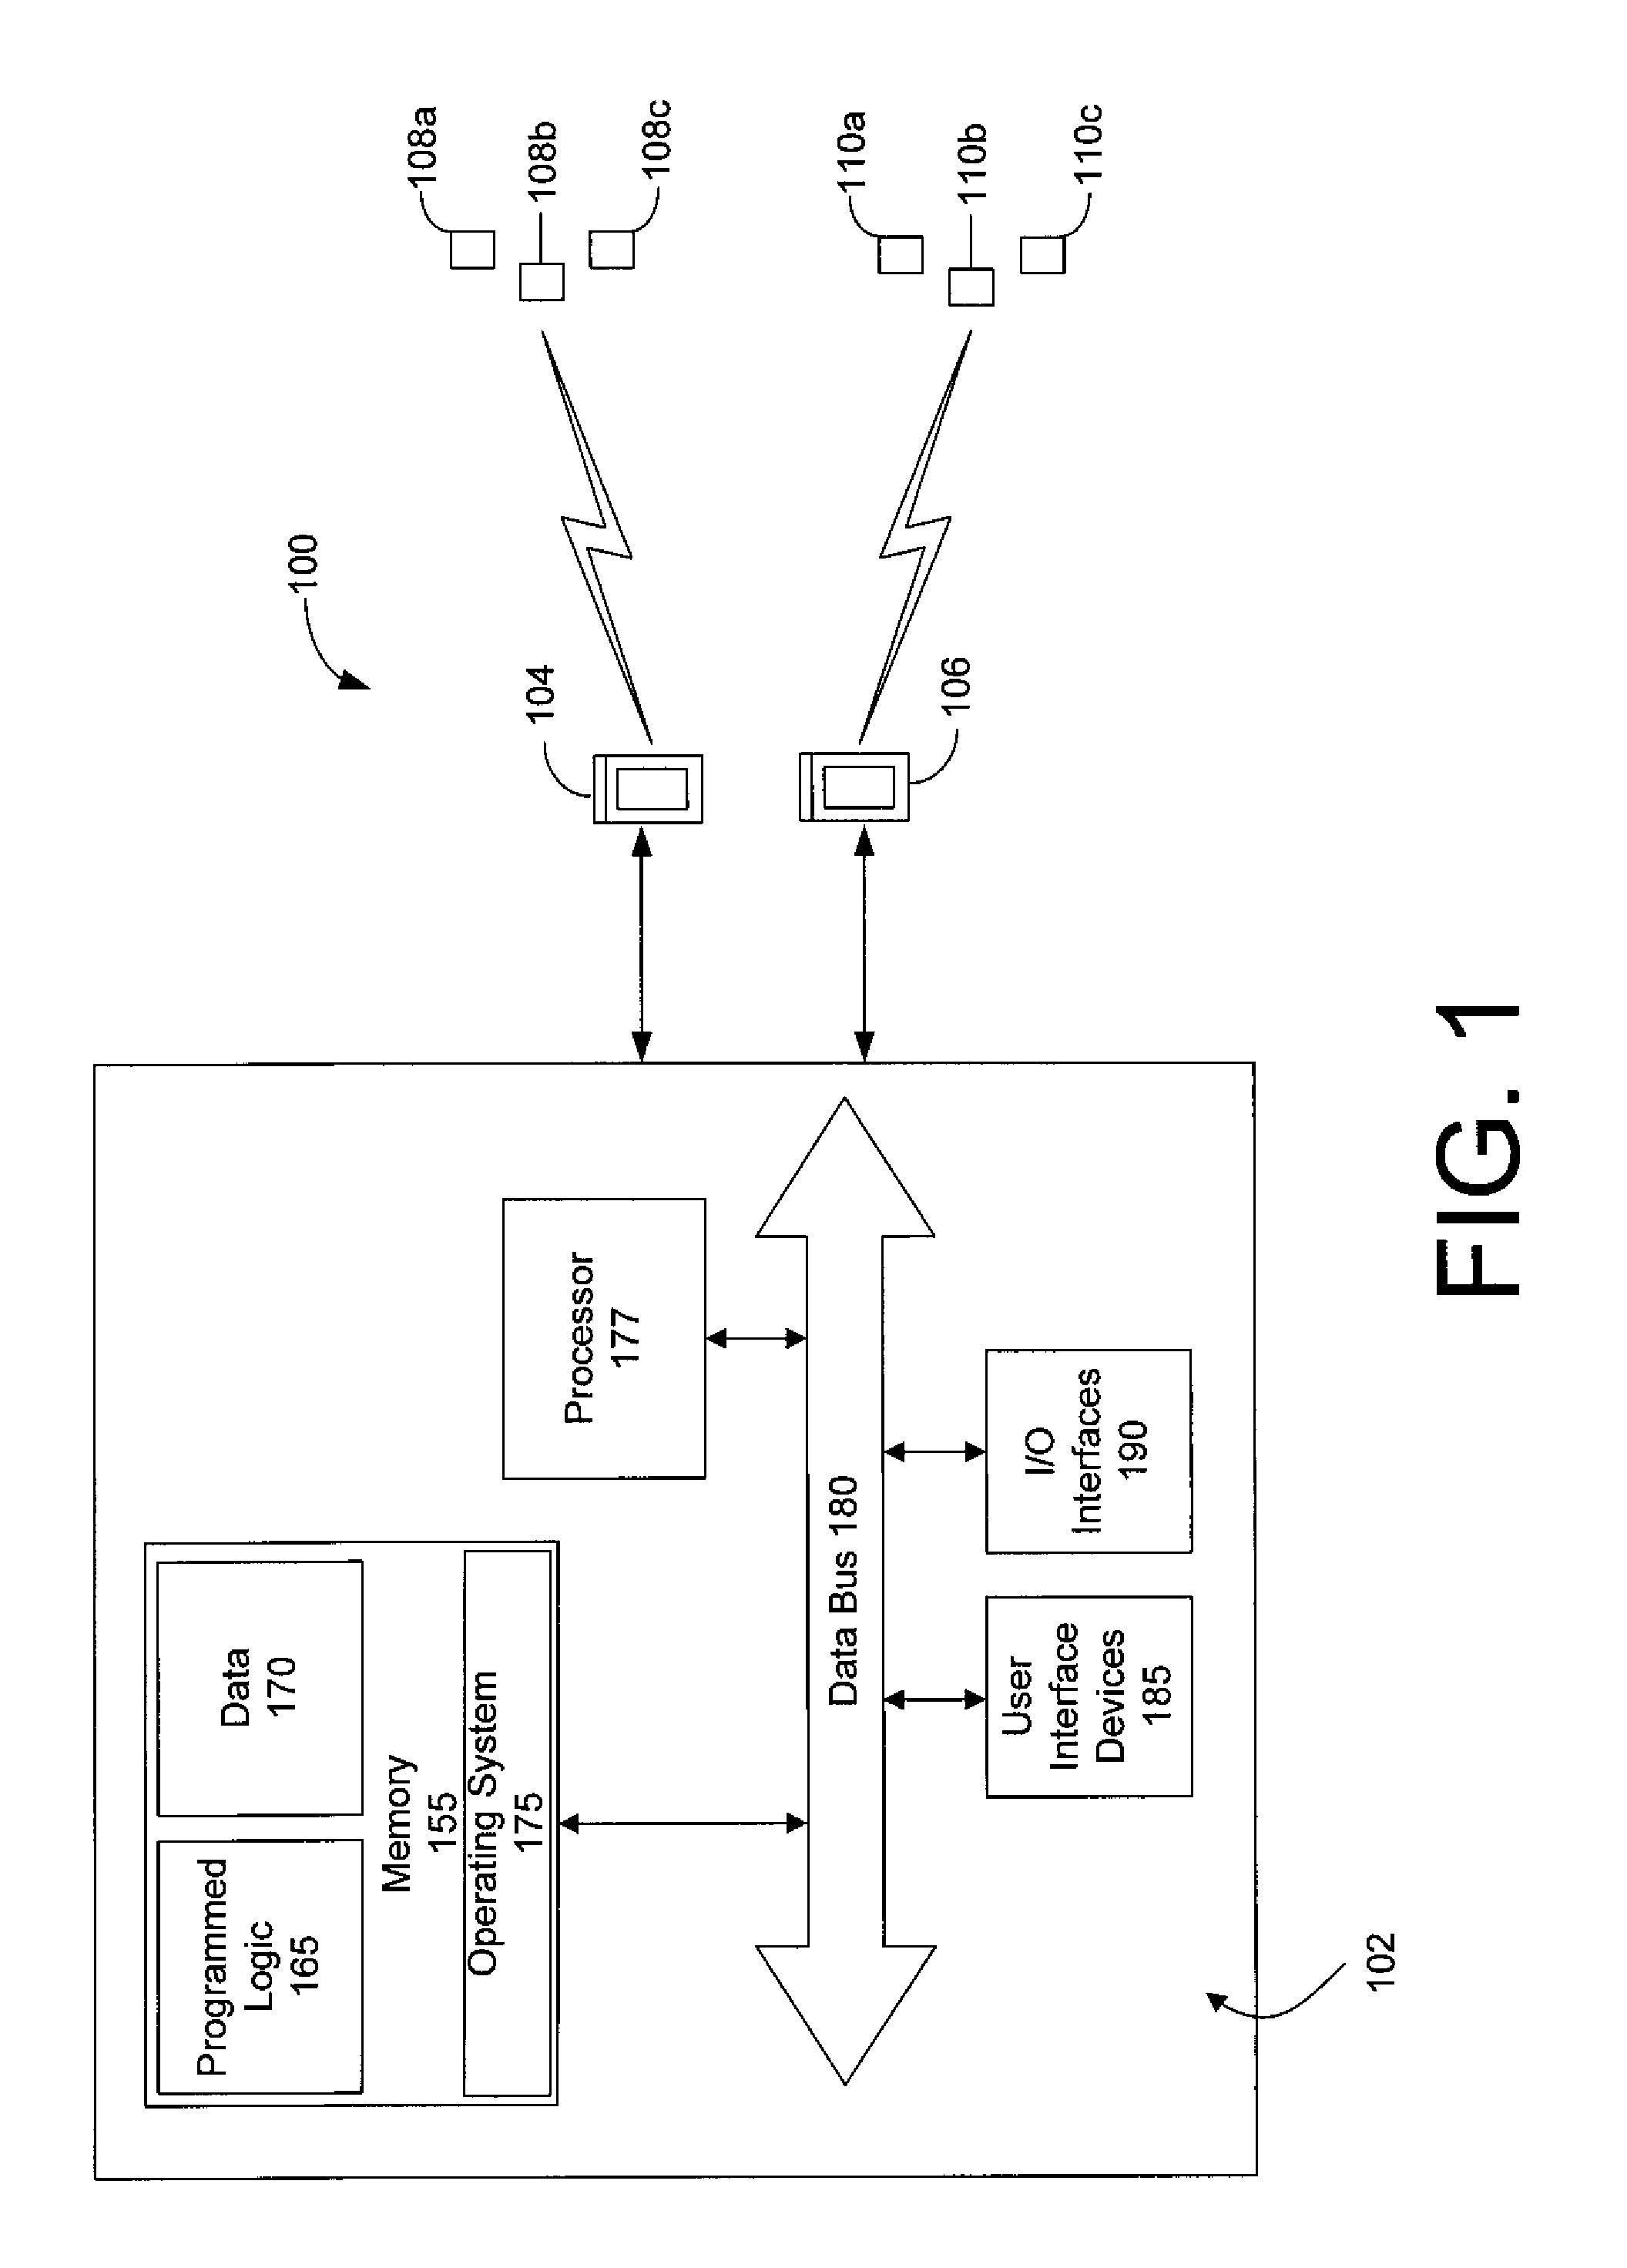 Systems, Methods, and Computer Program Products for Secure Optimistic Mechanisms for Constrained Devices